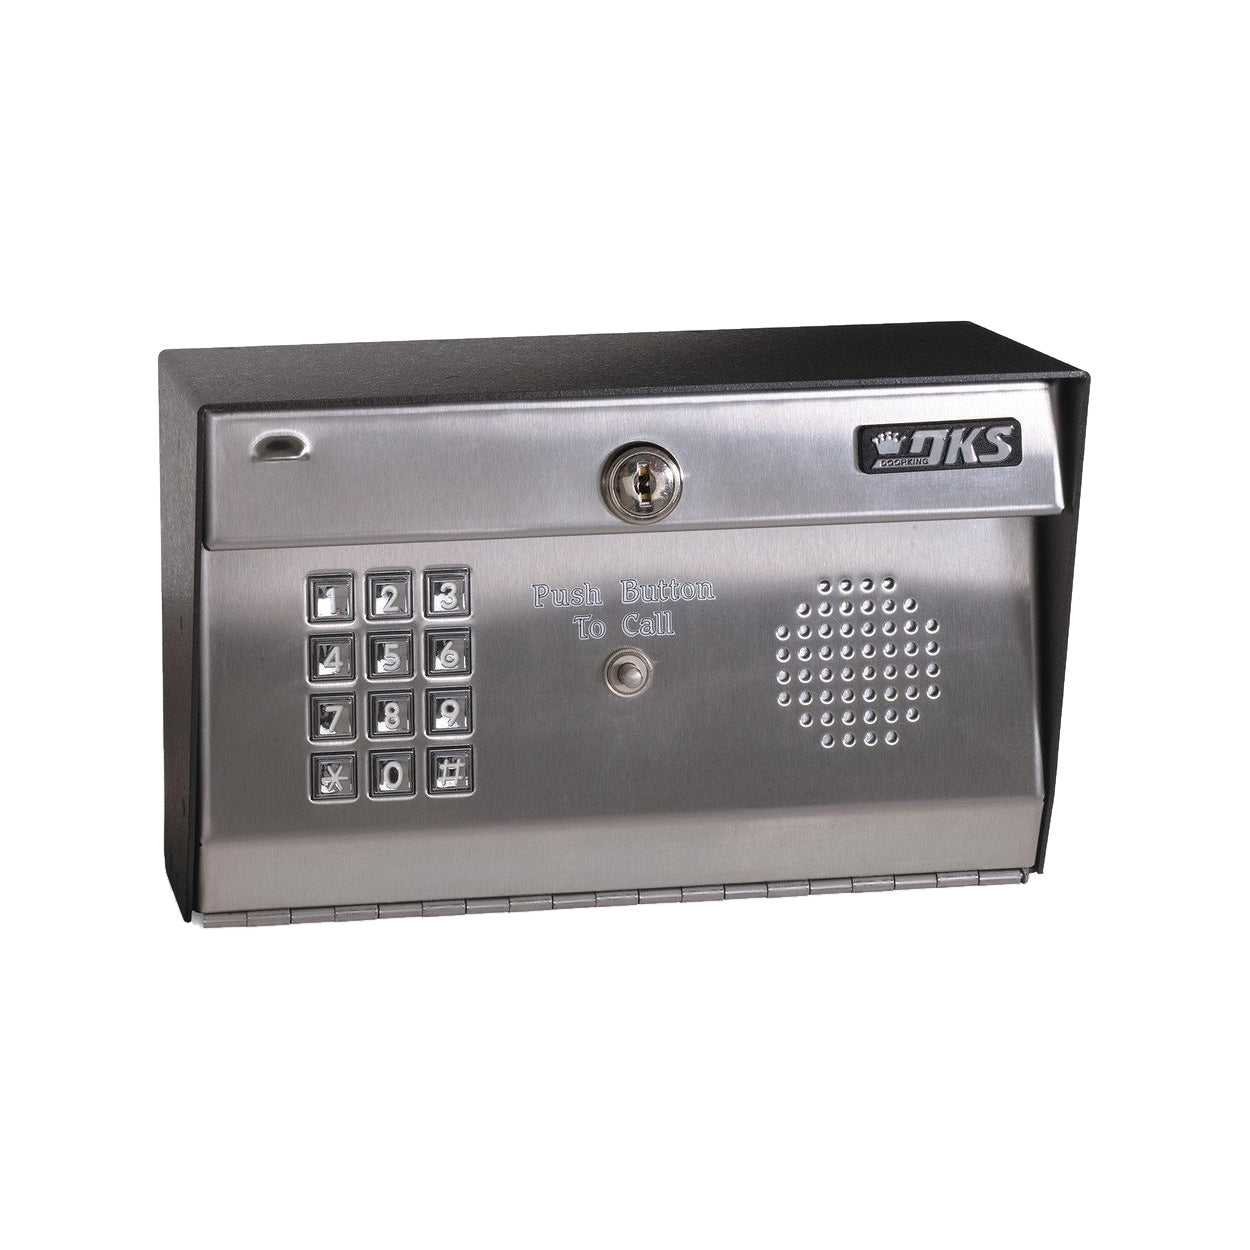 Doorking 1812-081 Classic Telephone Entry System